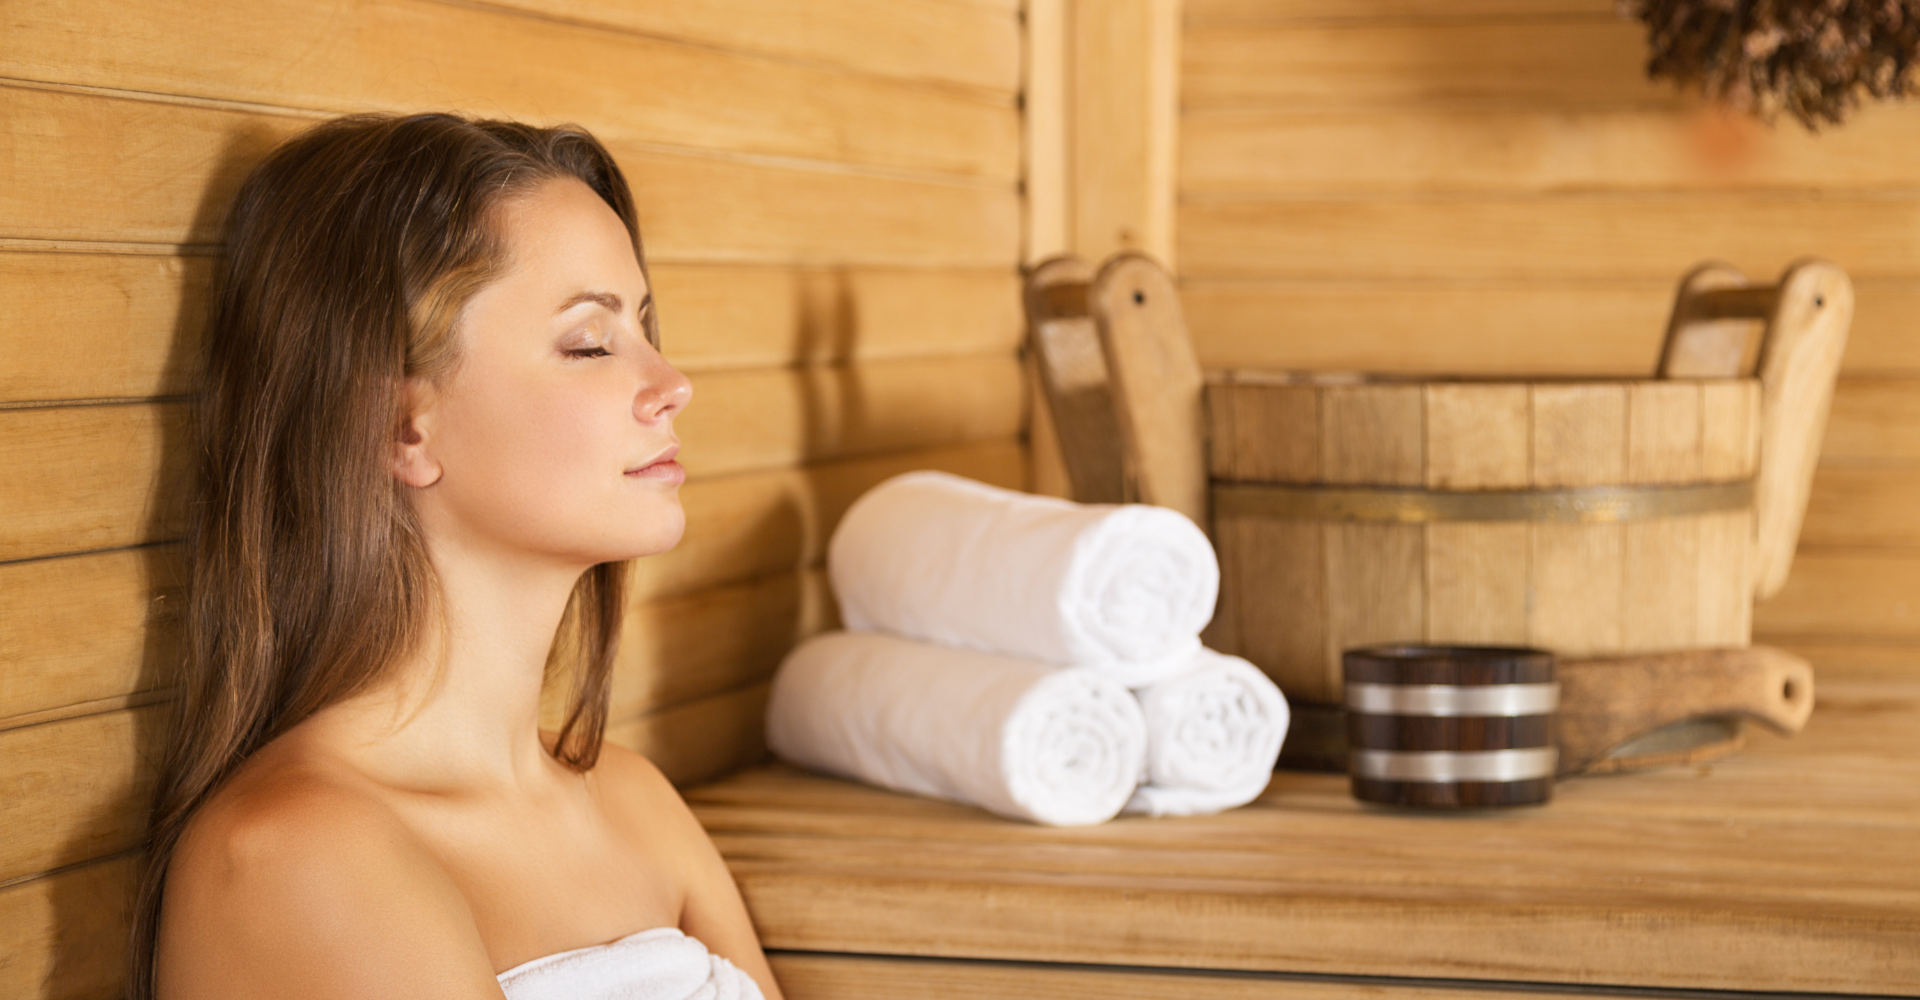 What Are the Actual Benefits of Saunas for Women?